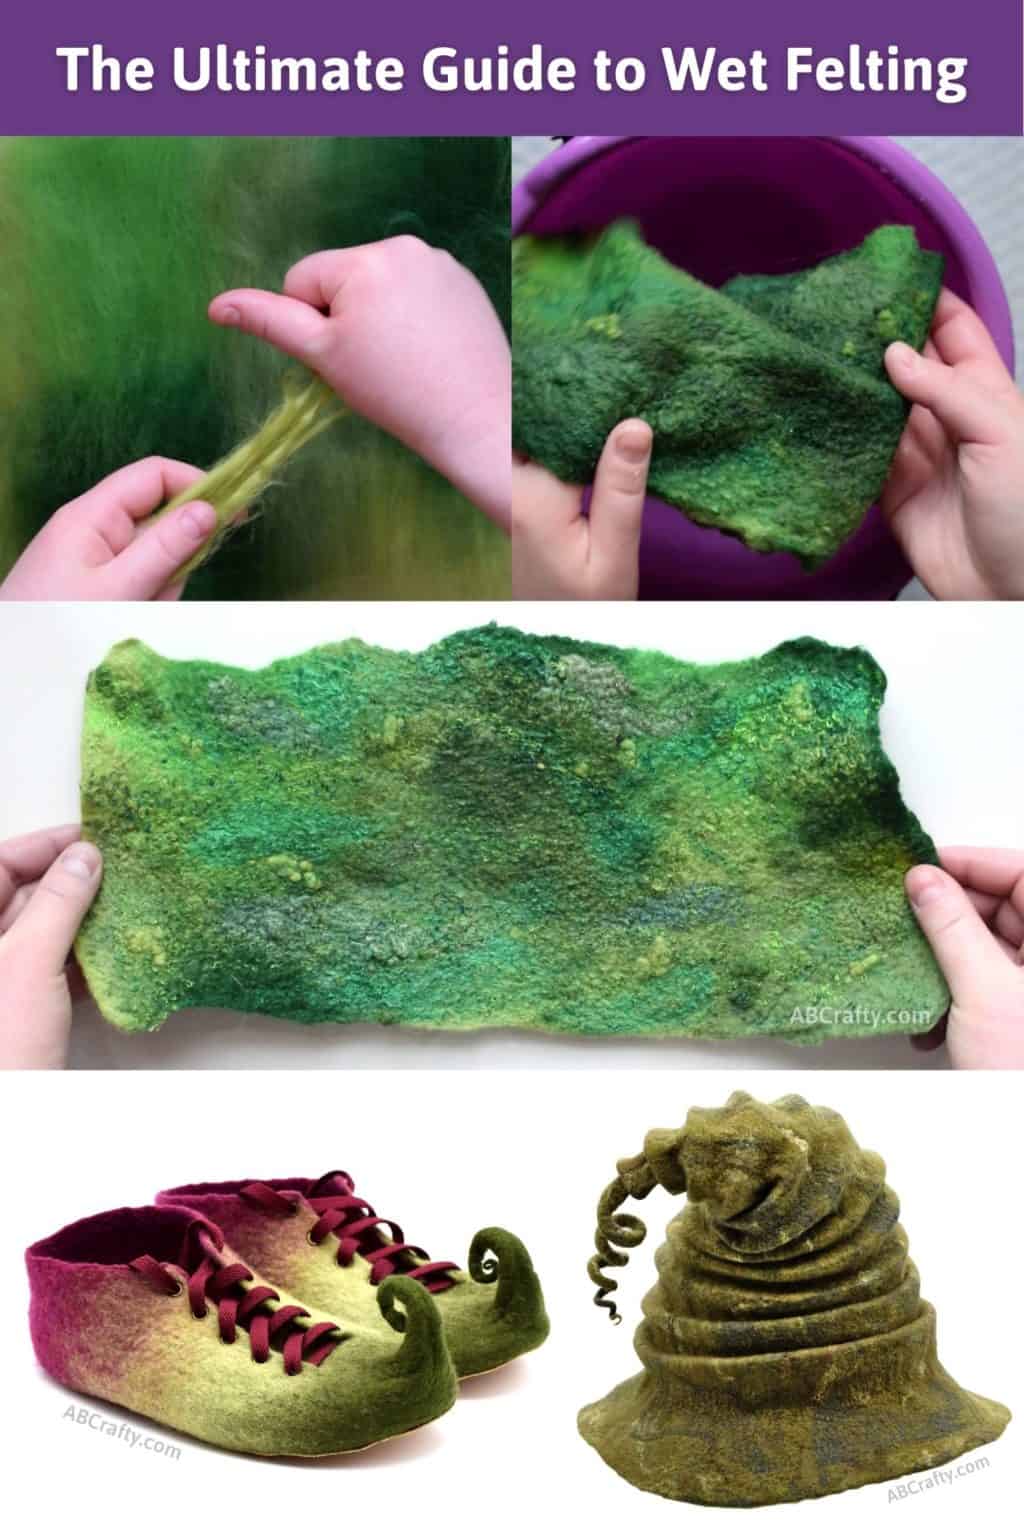 Multiple photos showing the wet felting process, working with wool, and holding a wet handmade piece of felt. Then finished wet felting projects including green and red felted elf shoes and green felted witch hat. The title reads "The ultimate guide to wet felting"